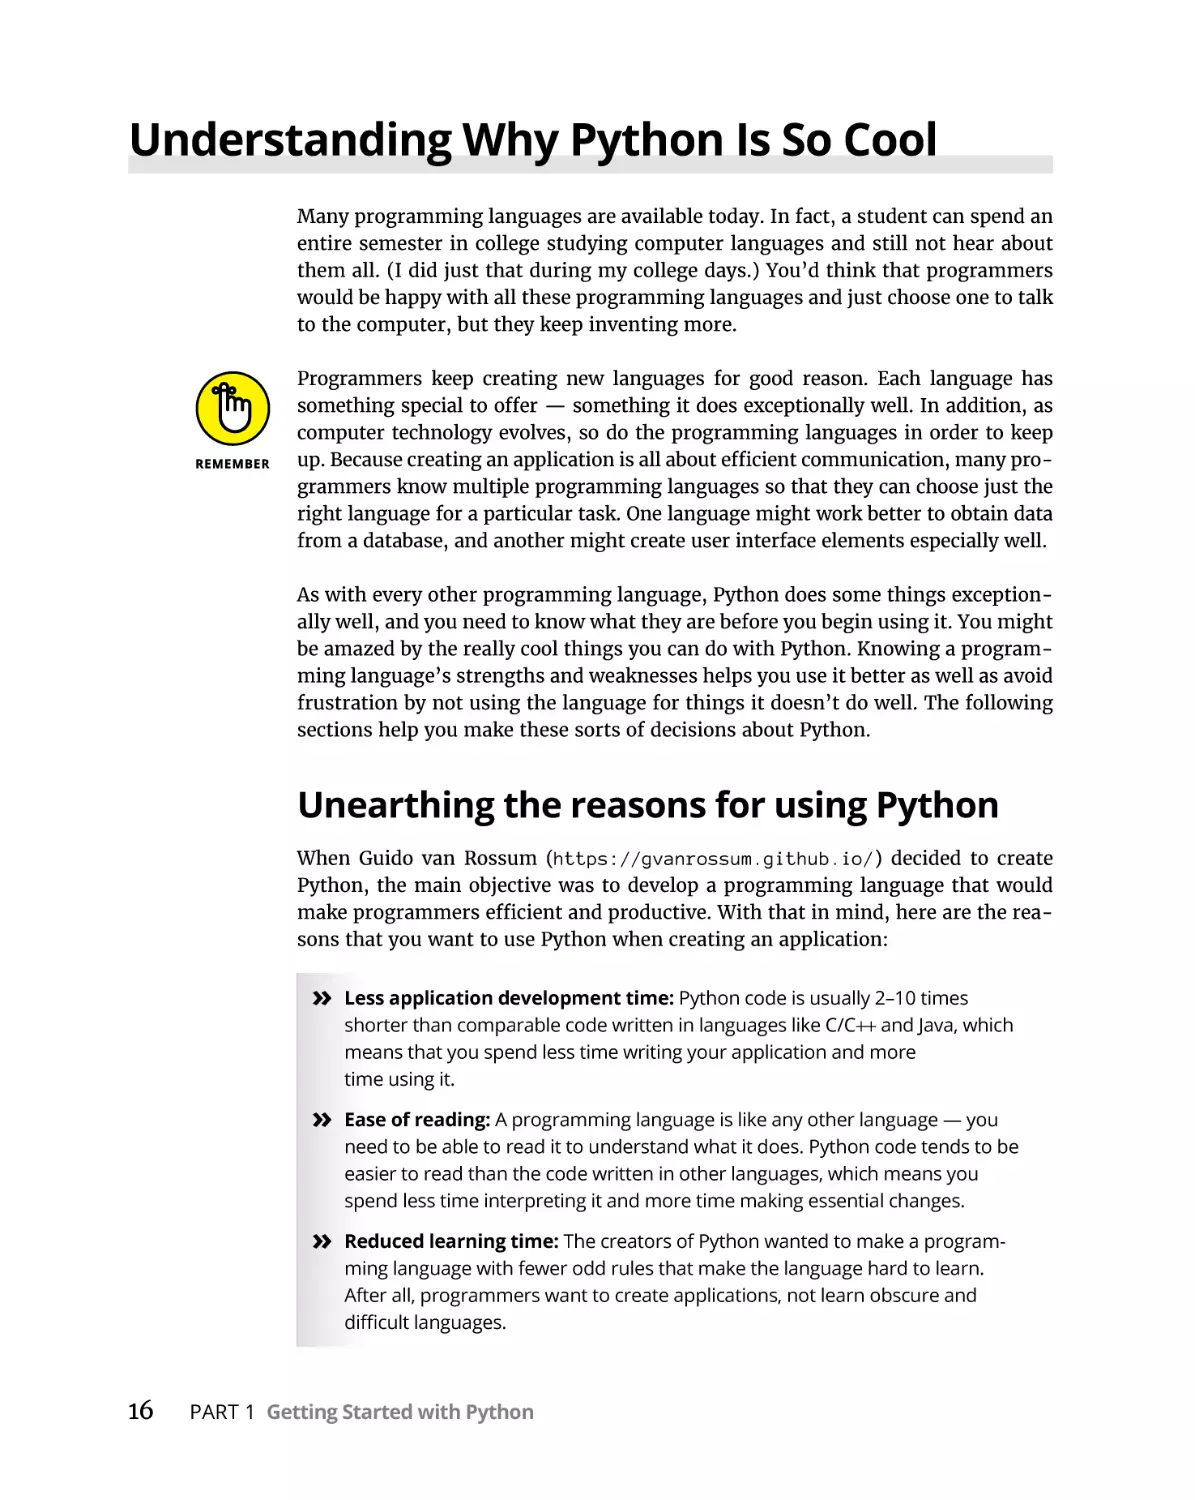 Understanding Why Python Is So Cool
Unearthing the reasons for using Python